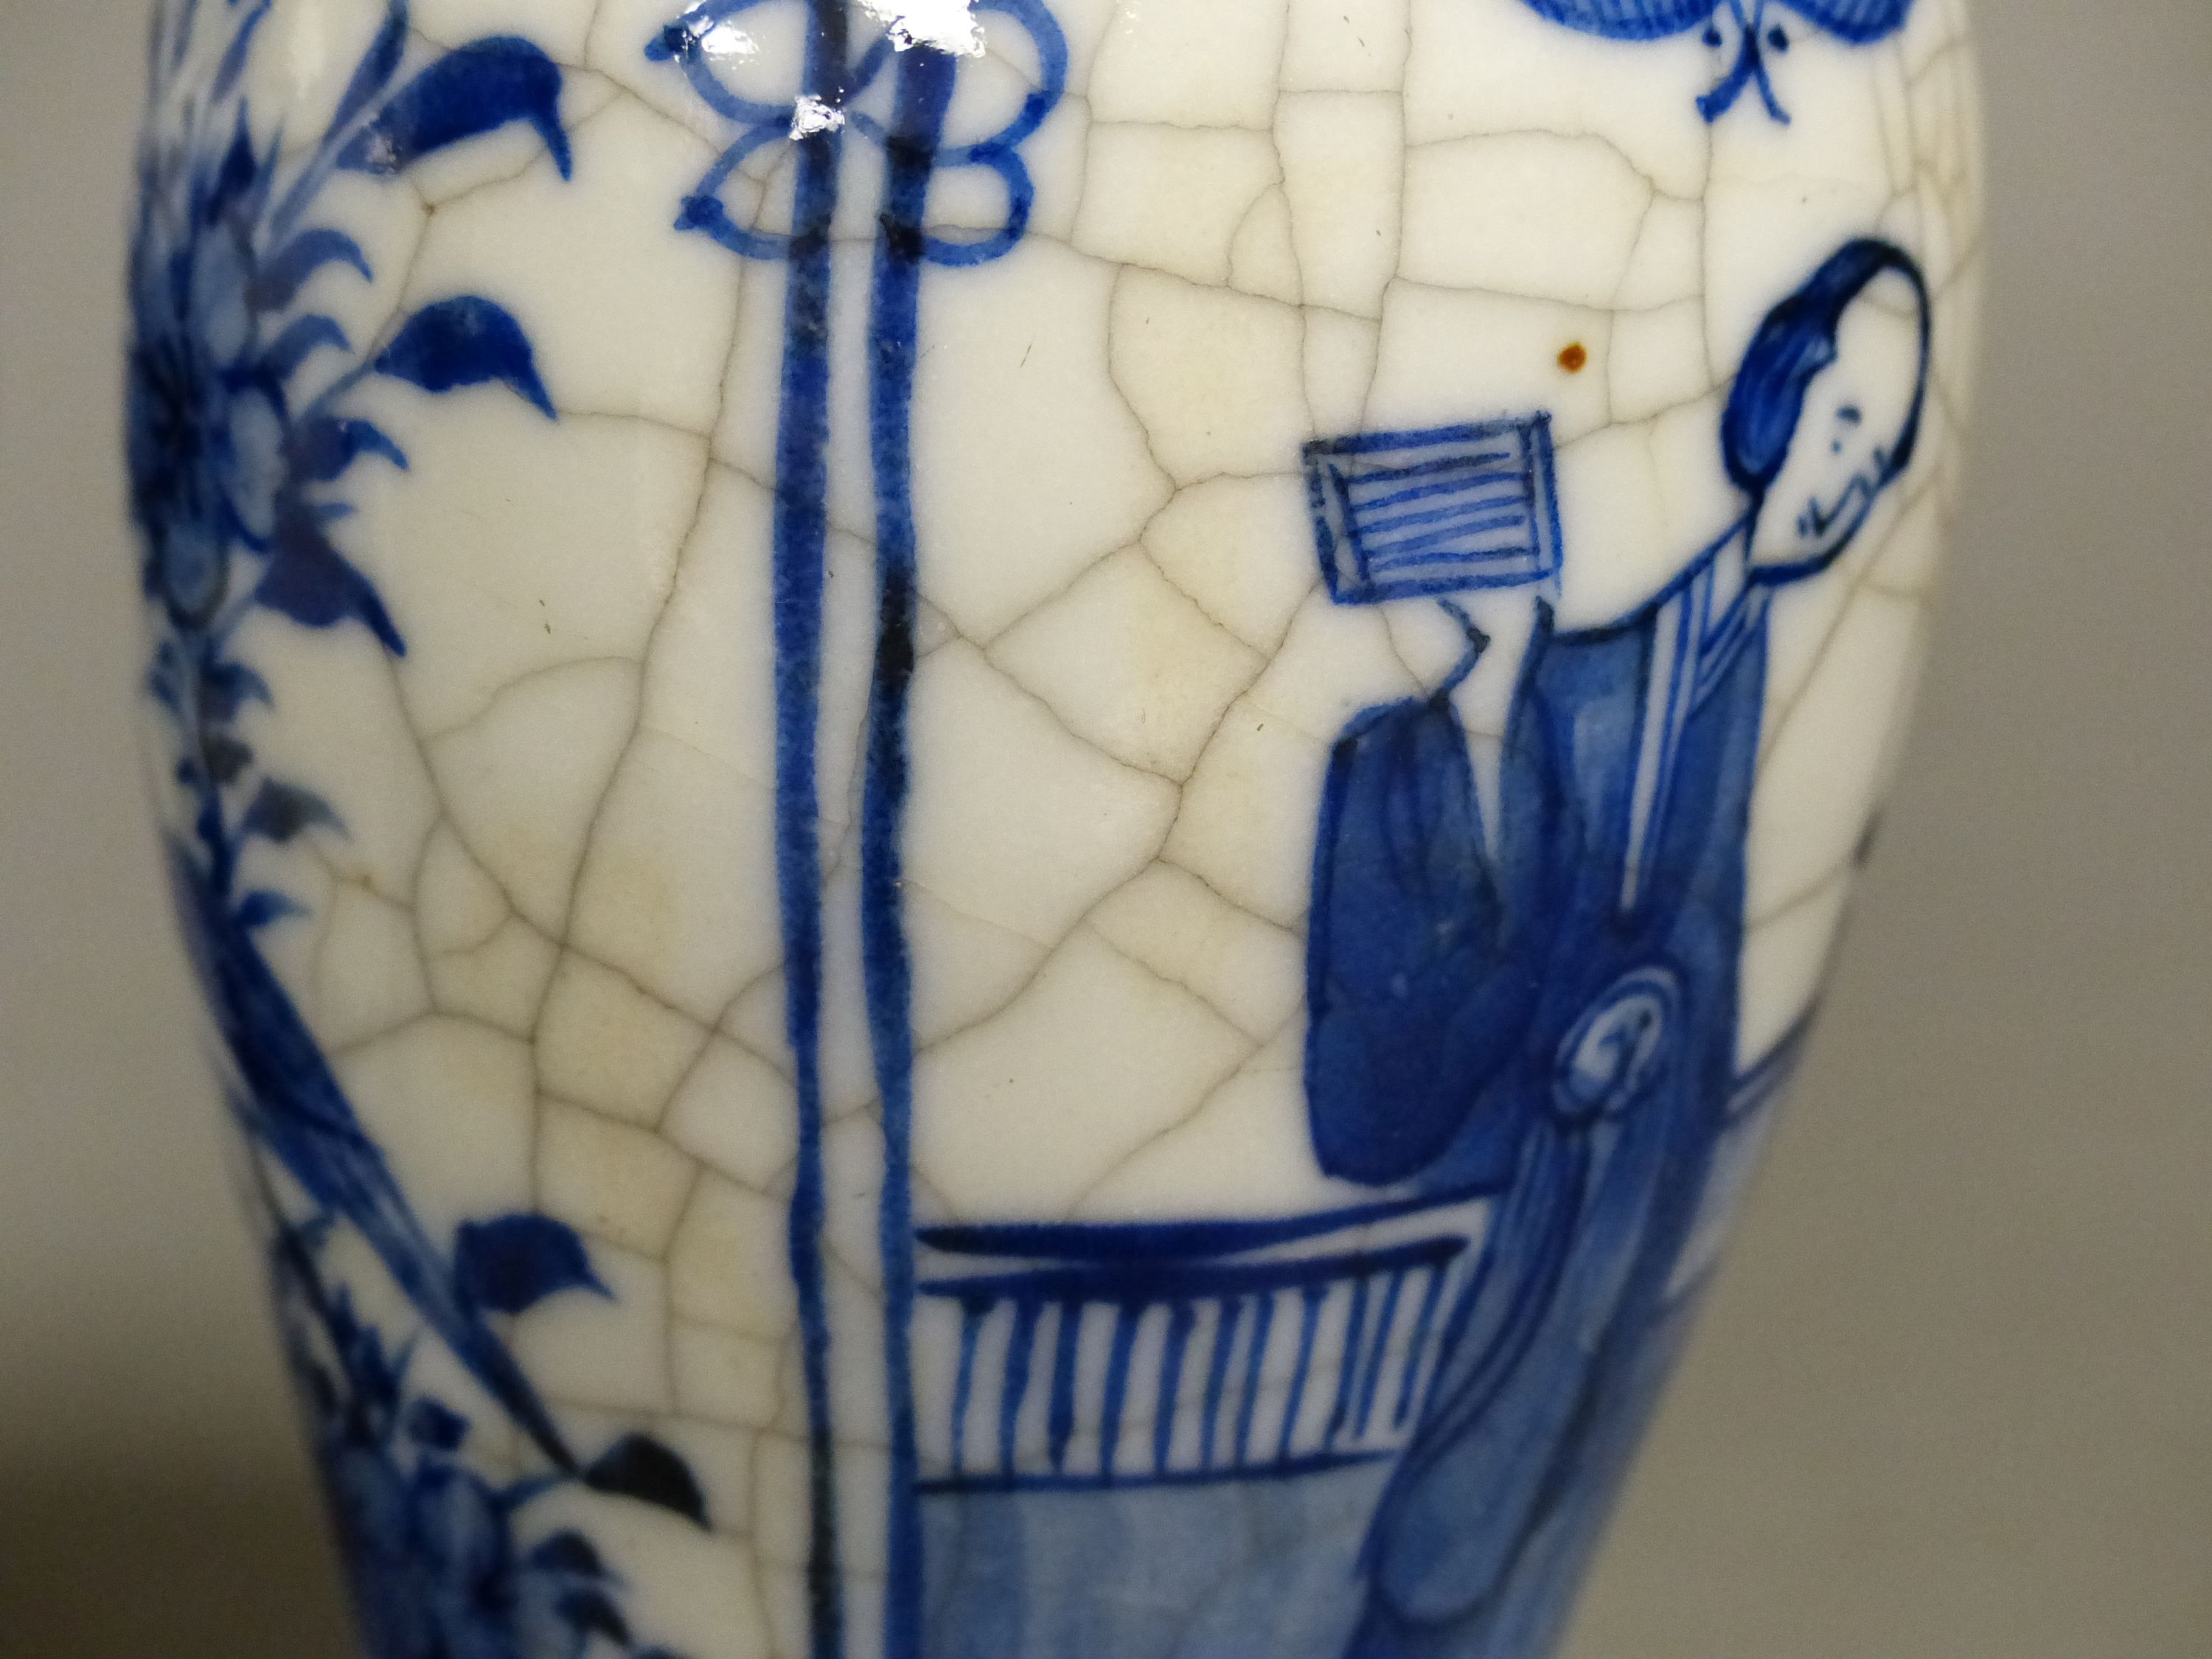 A pair of Chinese blue and white crackle glaze vases and covers, early 20th century, height 22cm